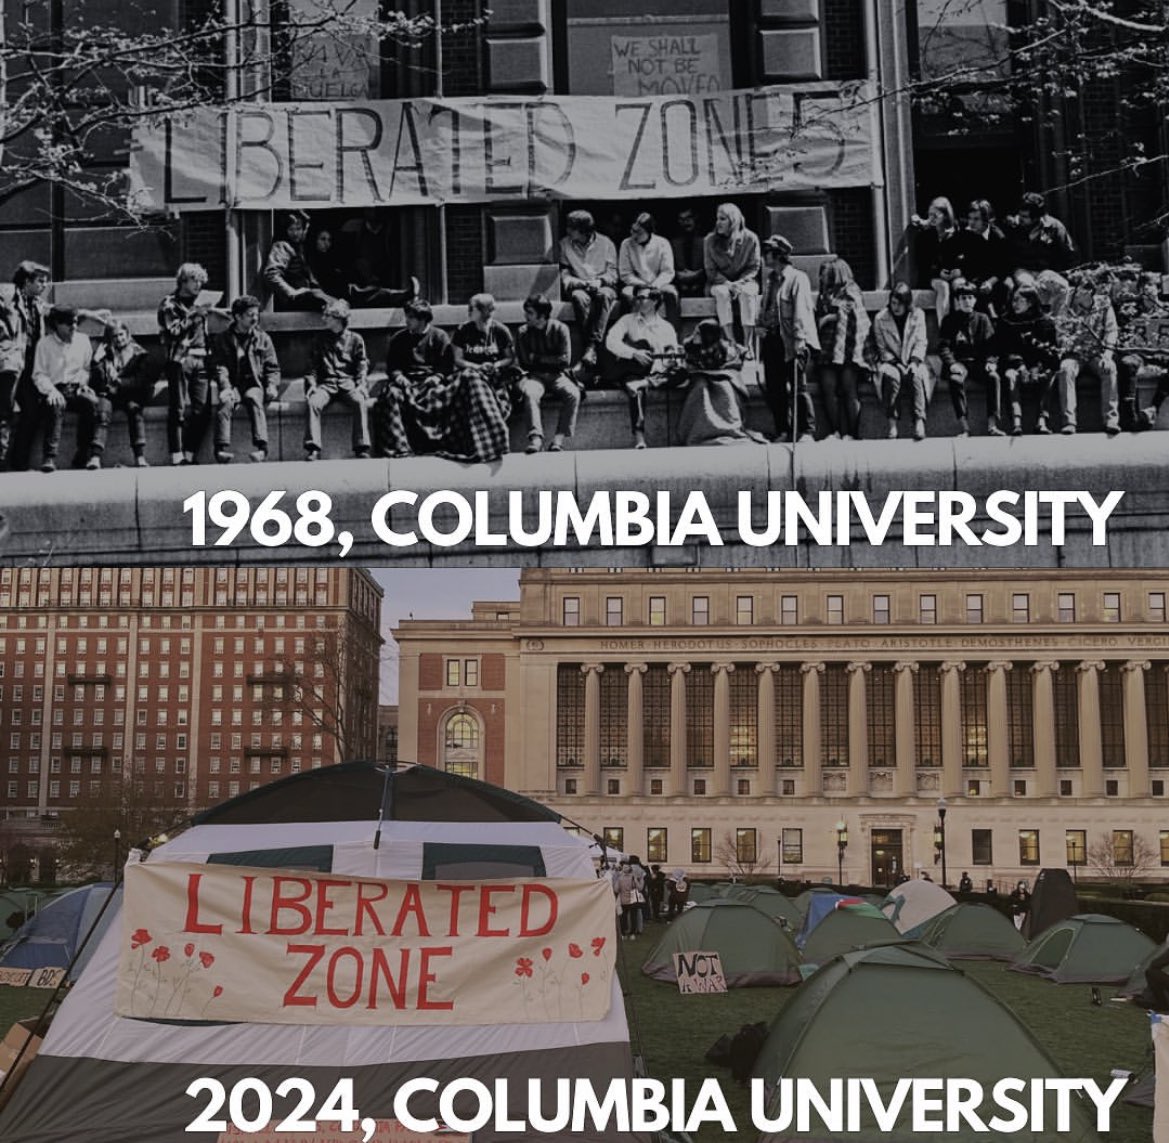 ALL EYES ON COLUMBIA: With arrests being threatened and negotiations ongoing, the Gaza Solidarity Encampment at Columbia University have called on all residents of conscience in New York City to come to the campus right now to provide support and RATCHET UP THE PRESSURE